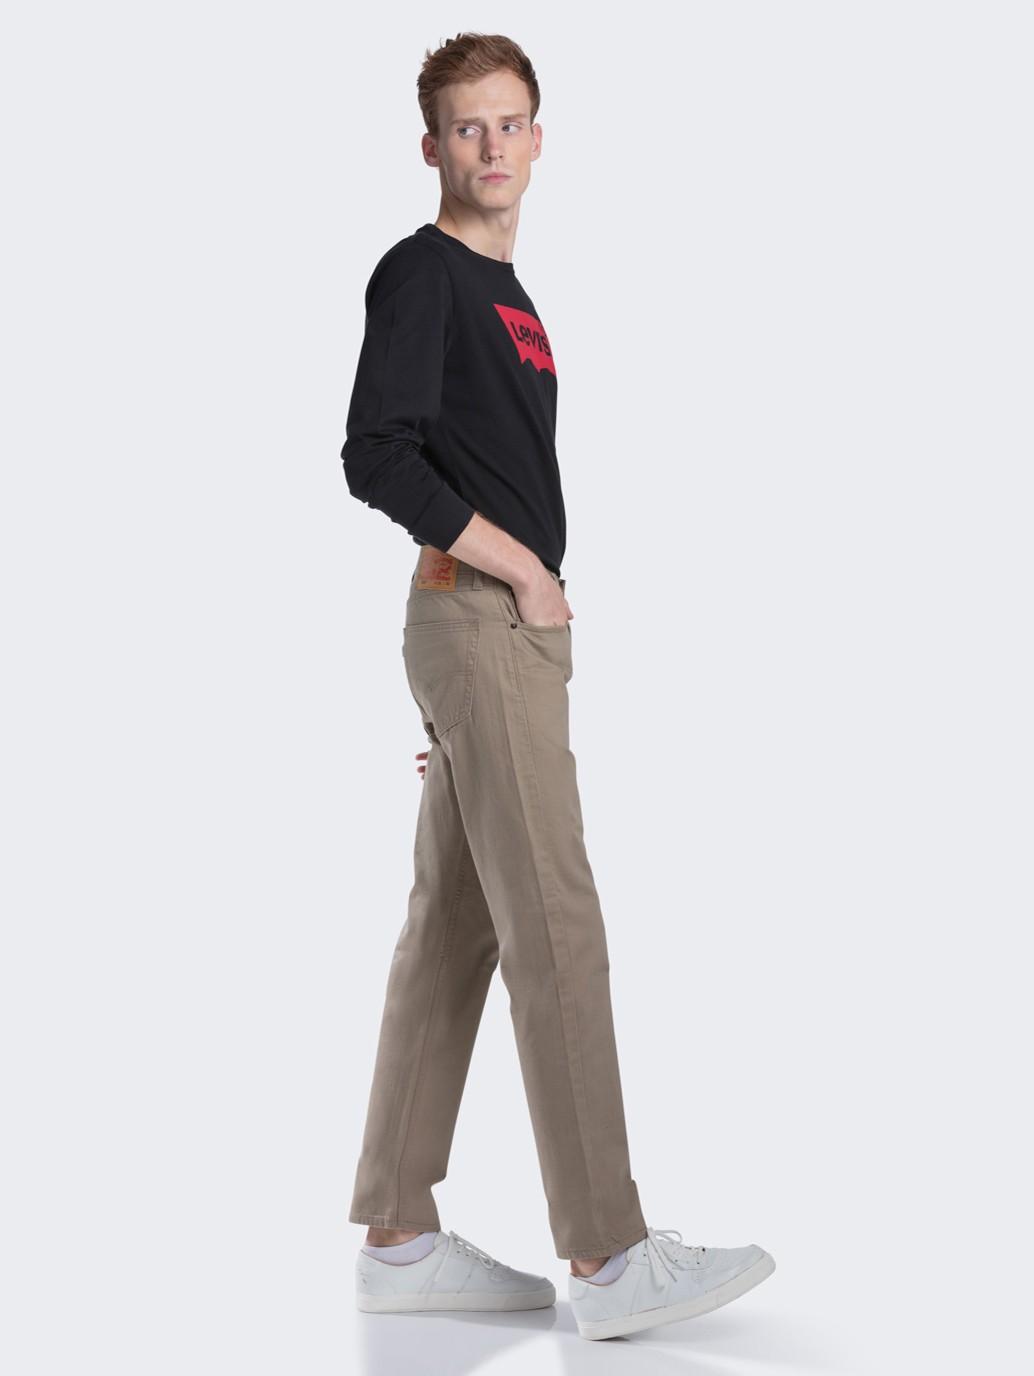 levis malaysia Levis 505 Regular Fit Pants 005050718 03 Side